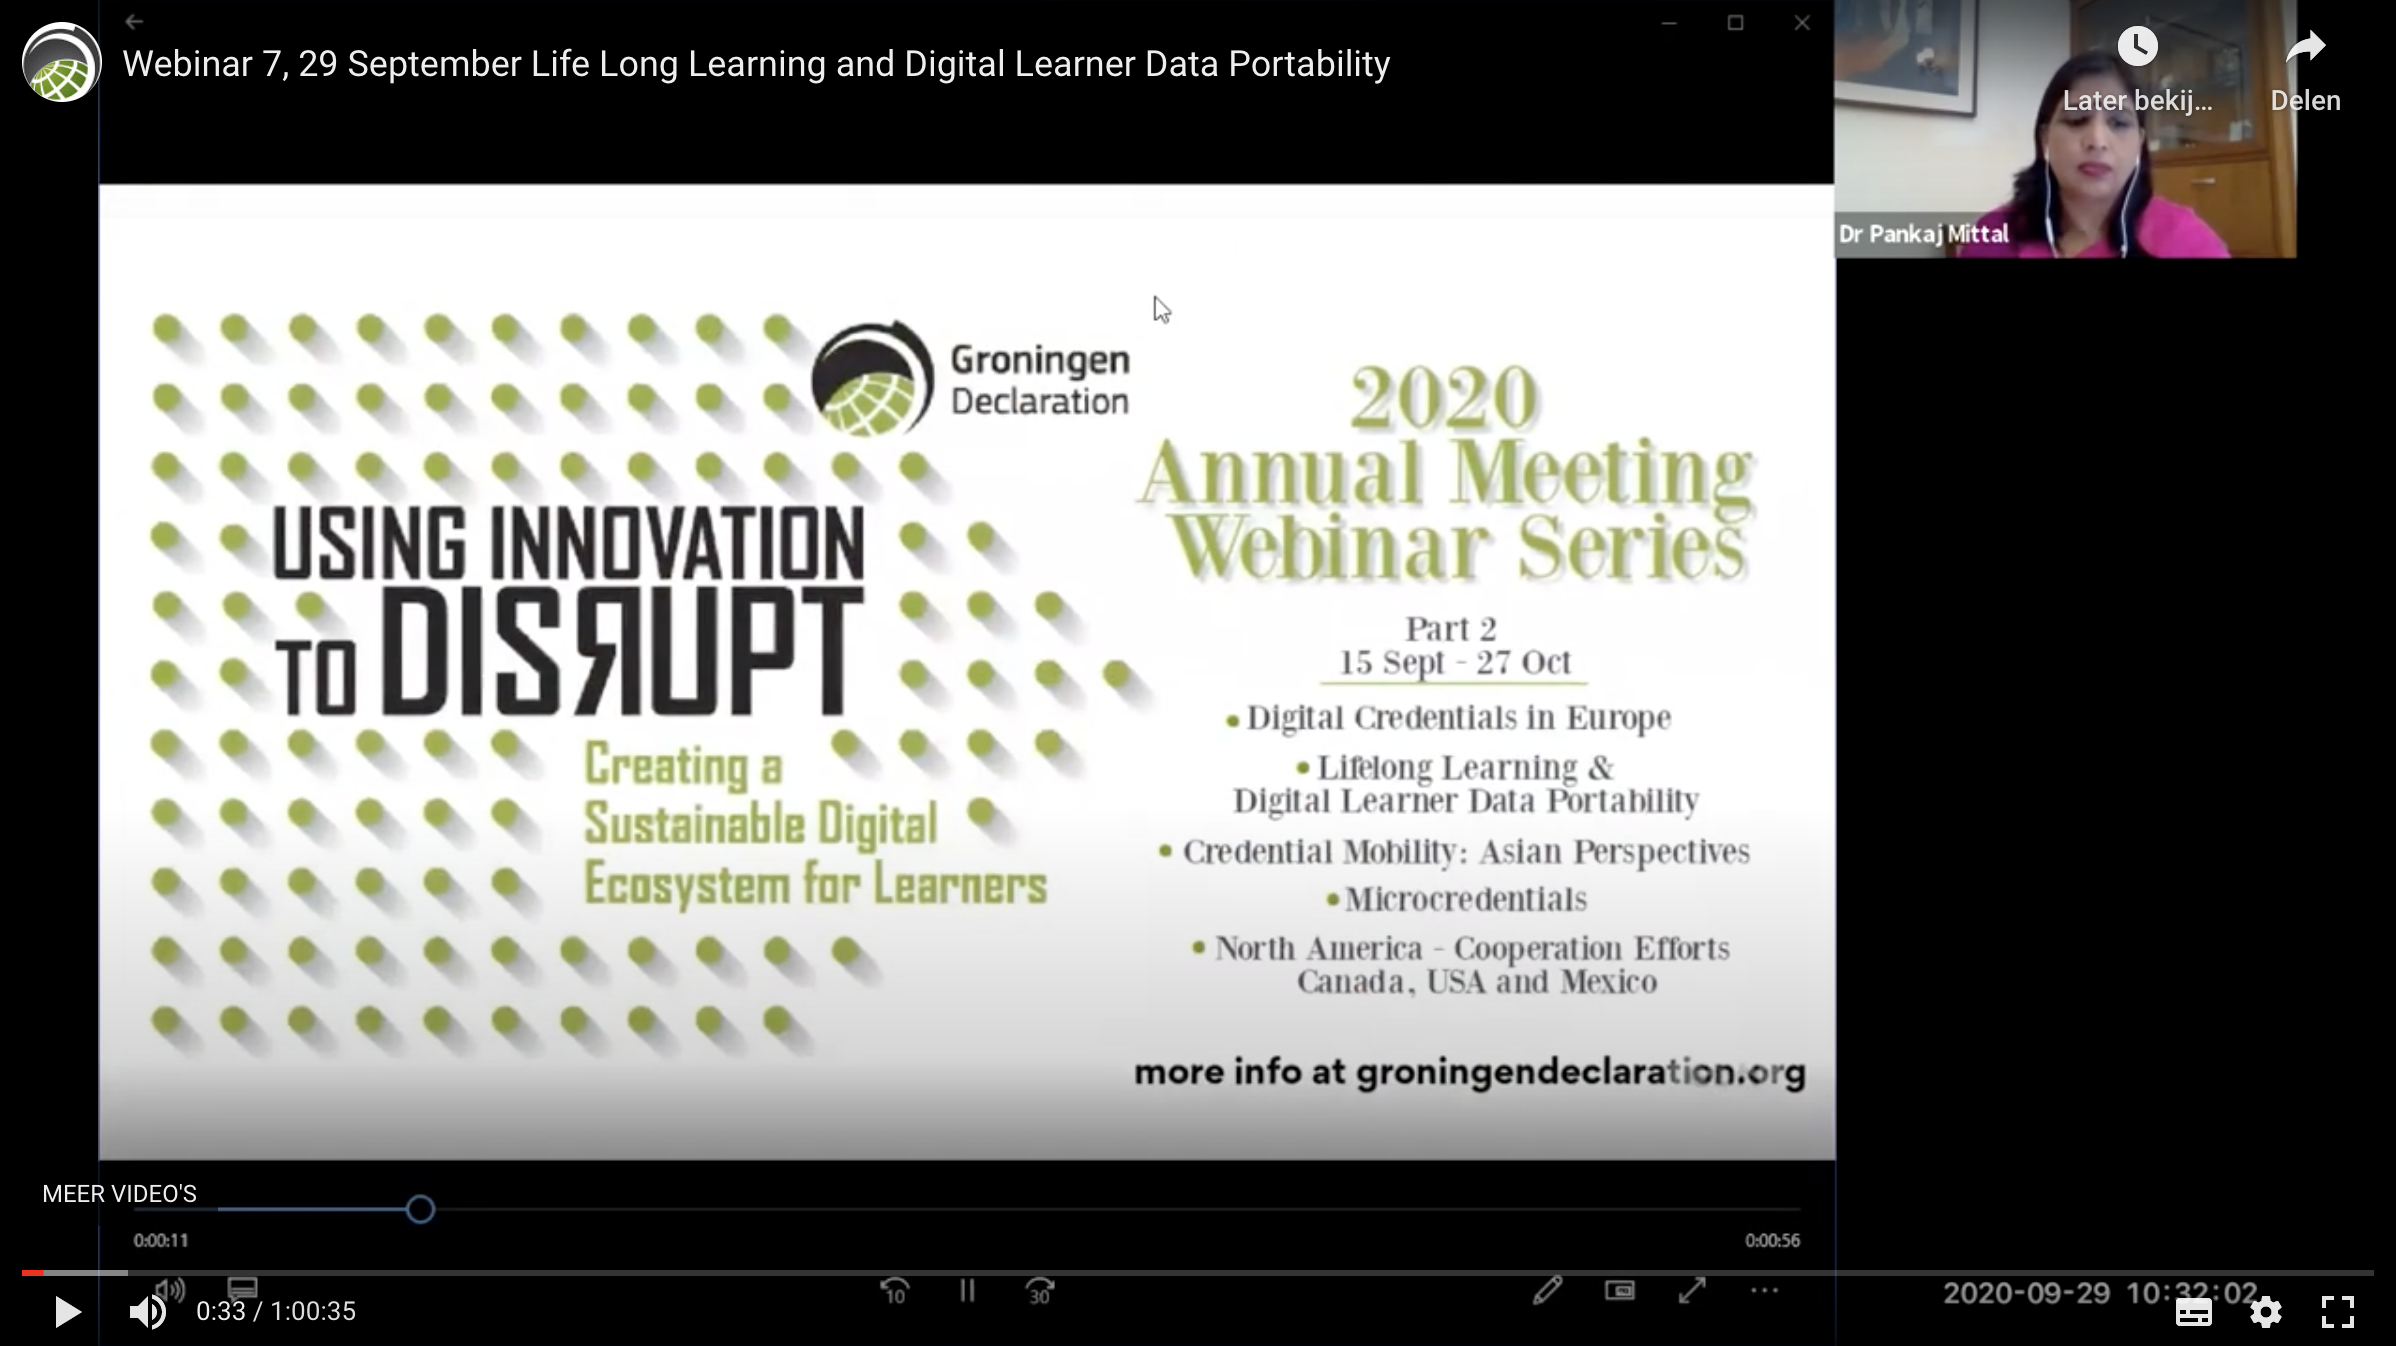 You are currently viewing Webinar 7, Life Long Learning and Digital Learner Data Portability